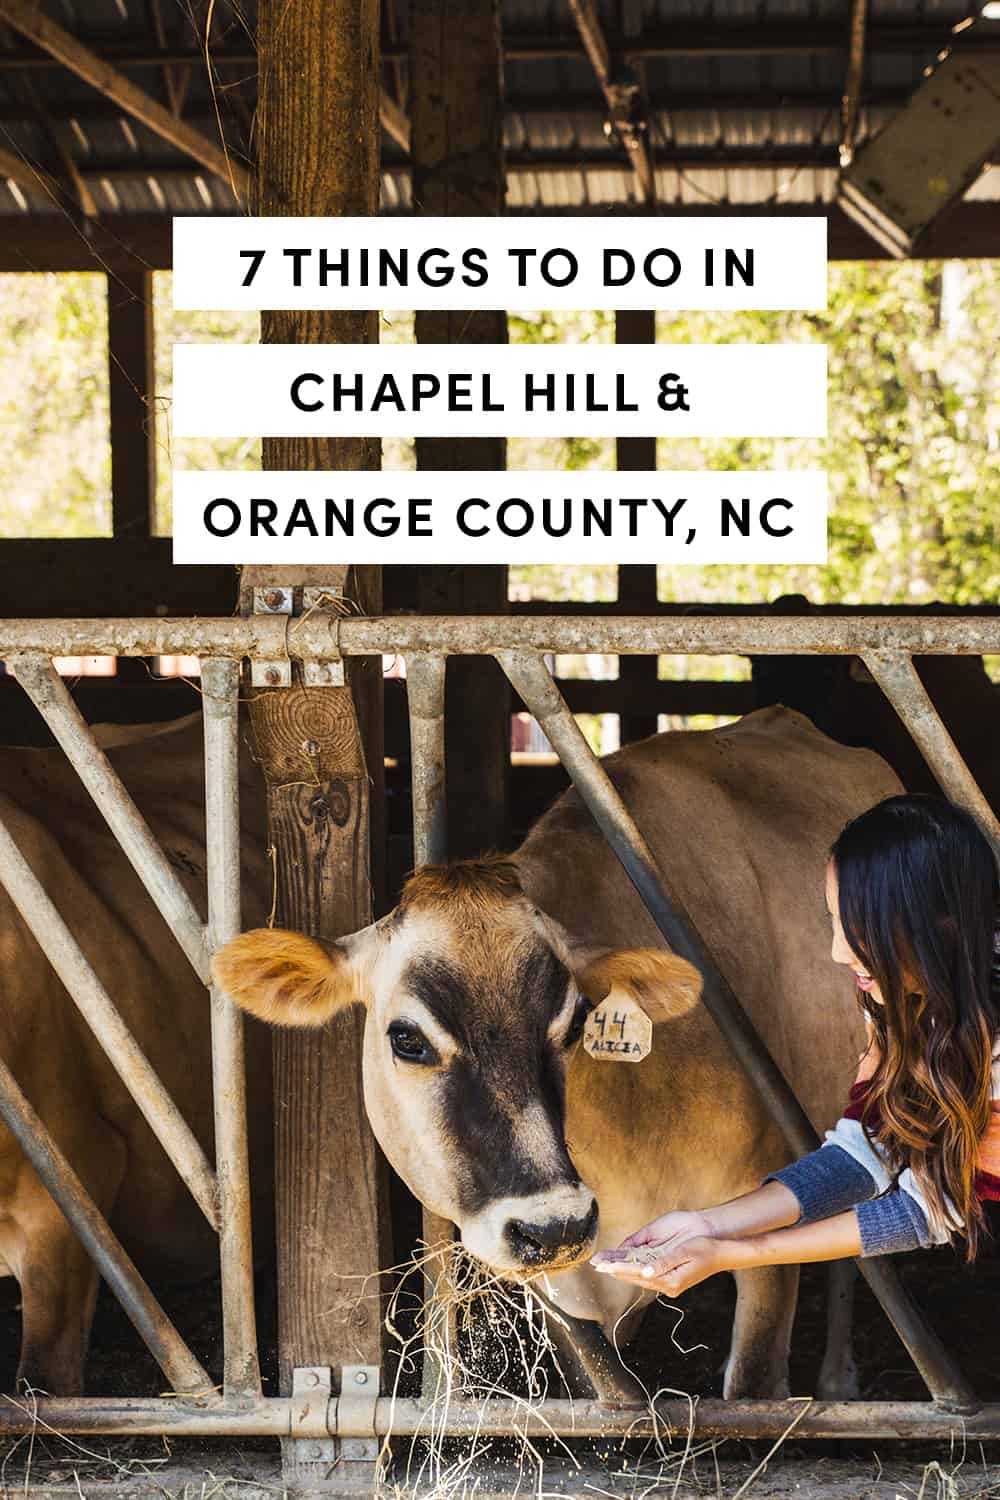 7 Things To Do In Chapel Hill and Orange County, NC